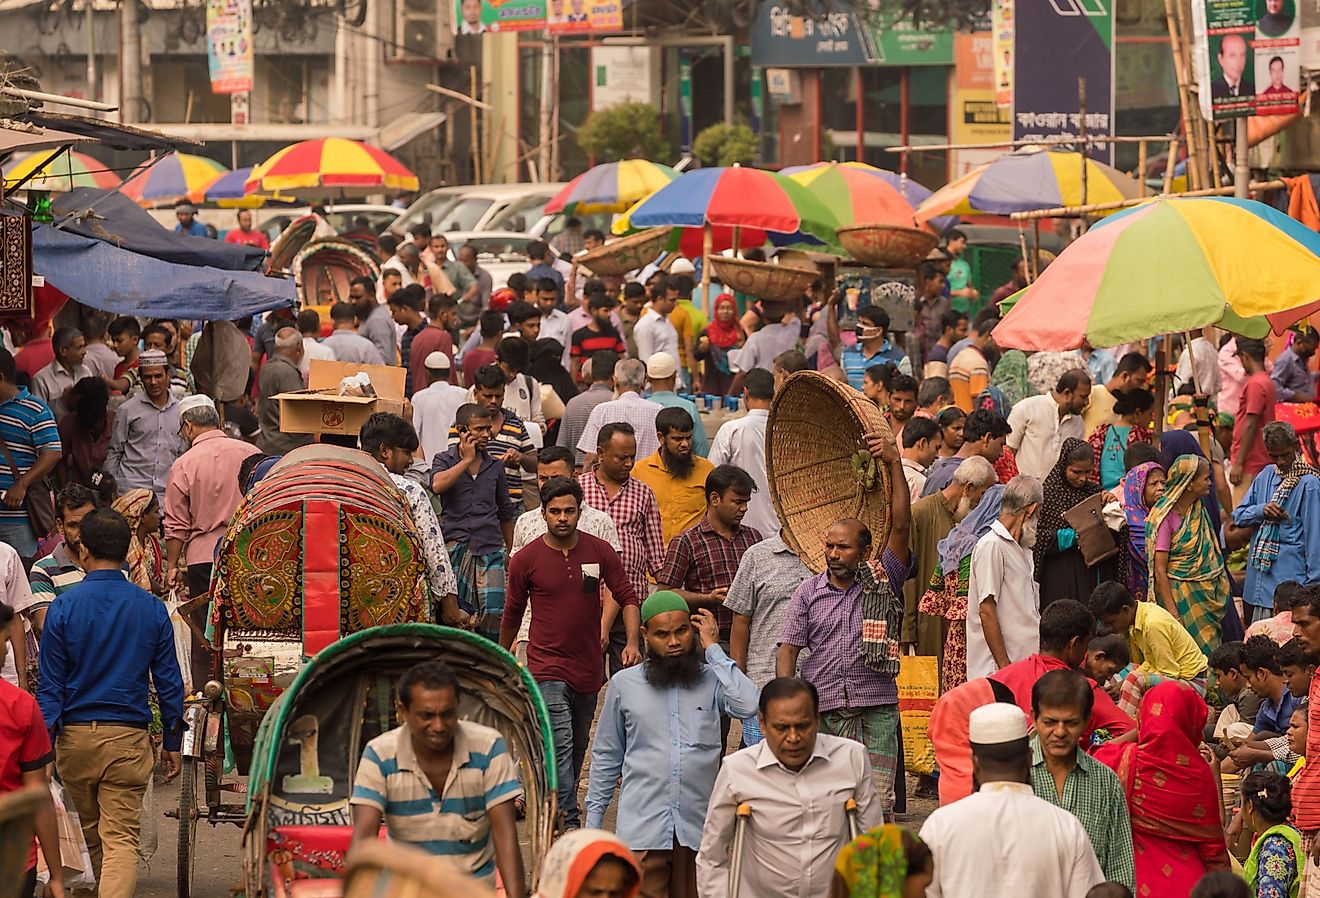 Kawran Bazar is a business district and is one the biggest commodity marketplaces in Dhaka. Image credit Hit1912 via Shutterstock.